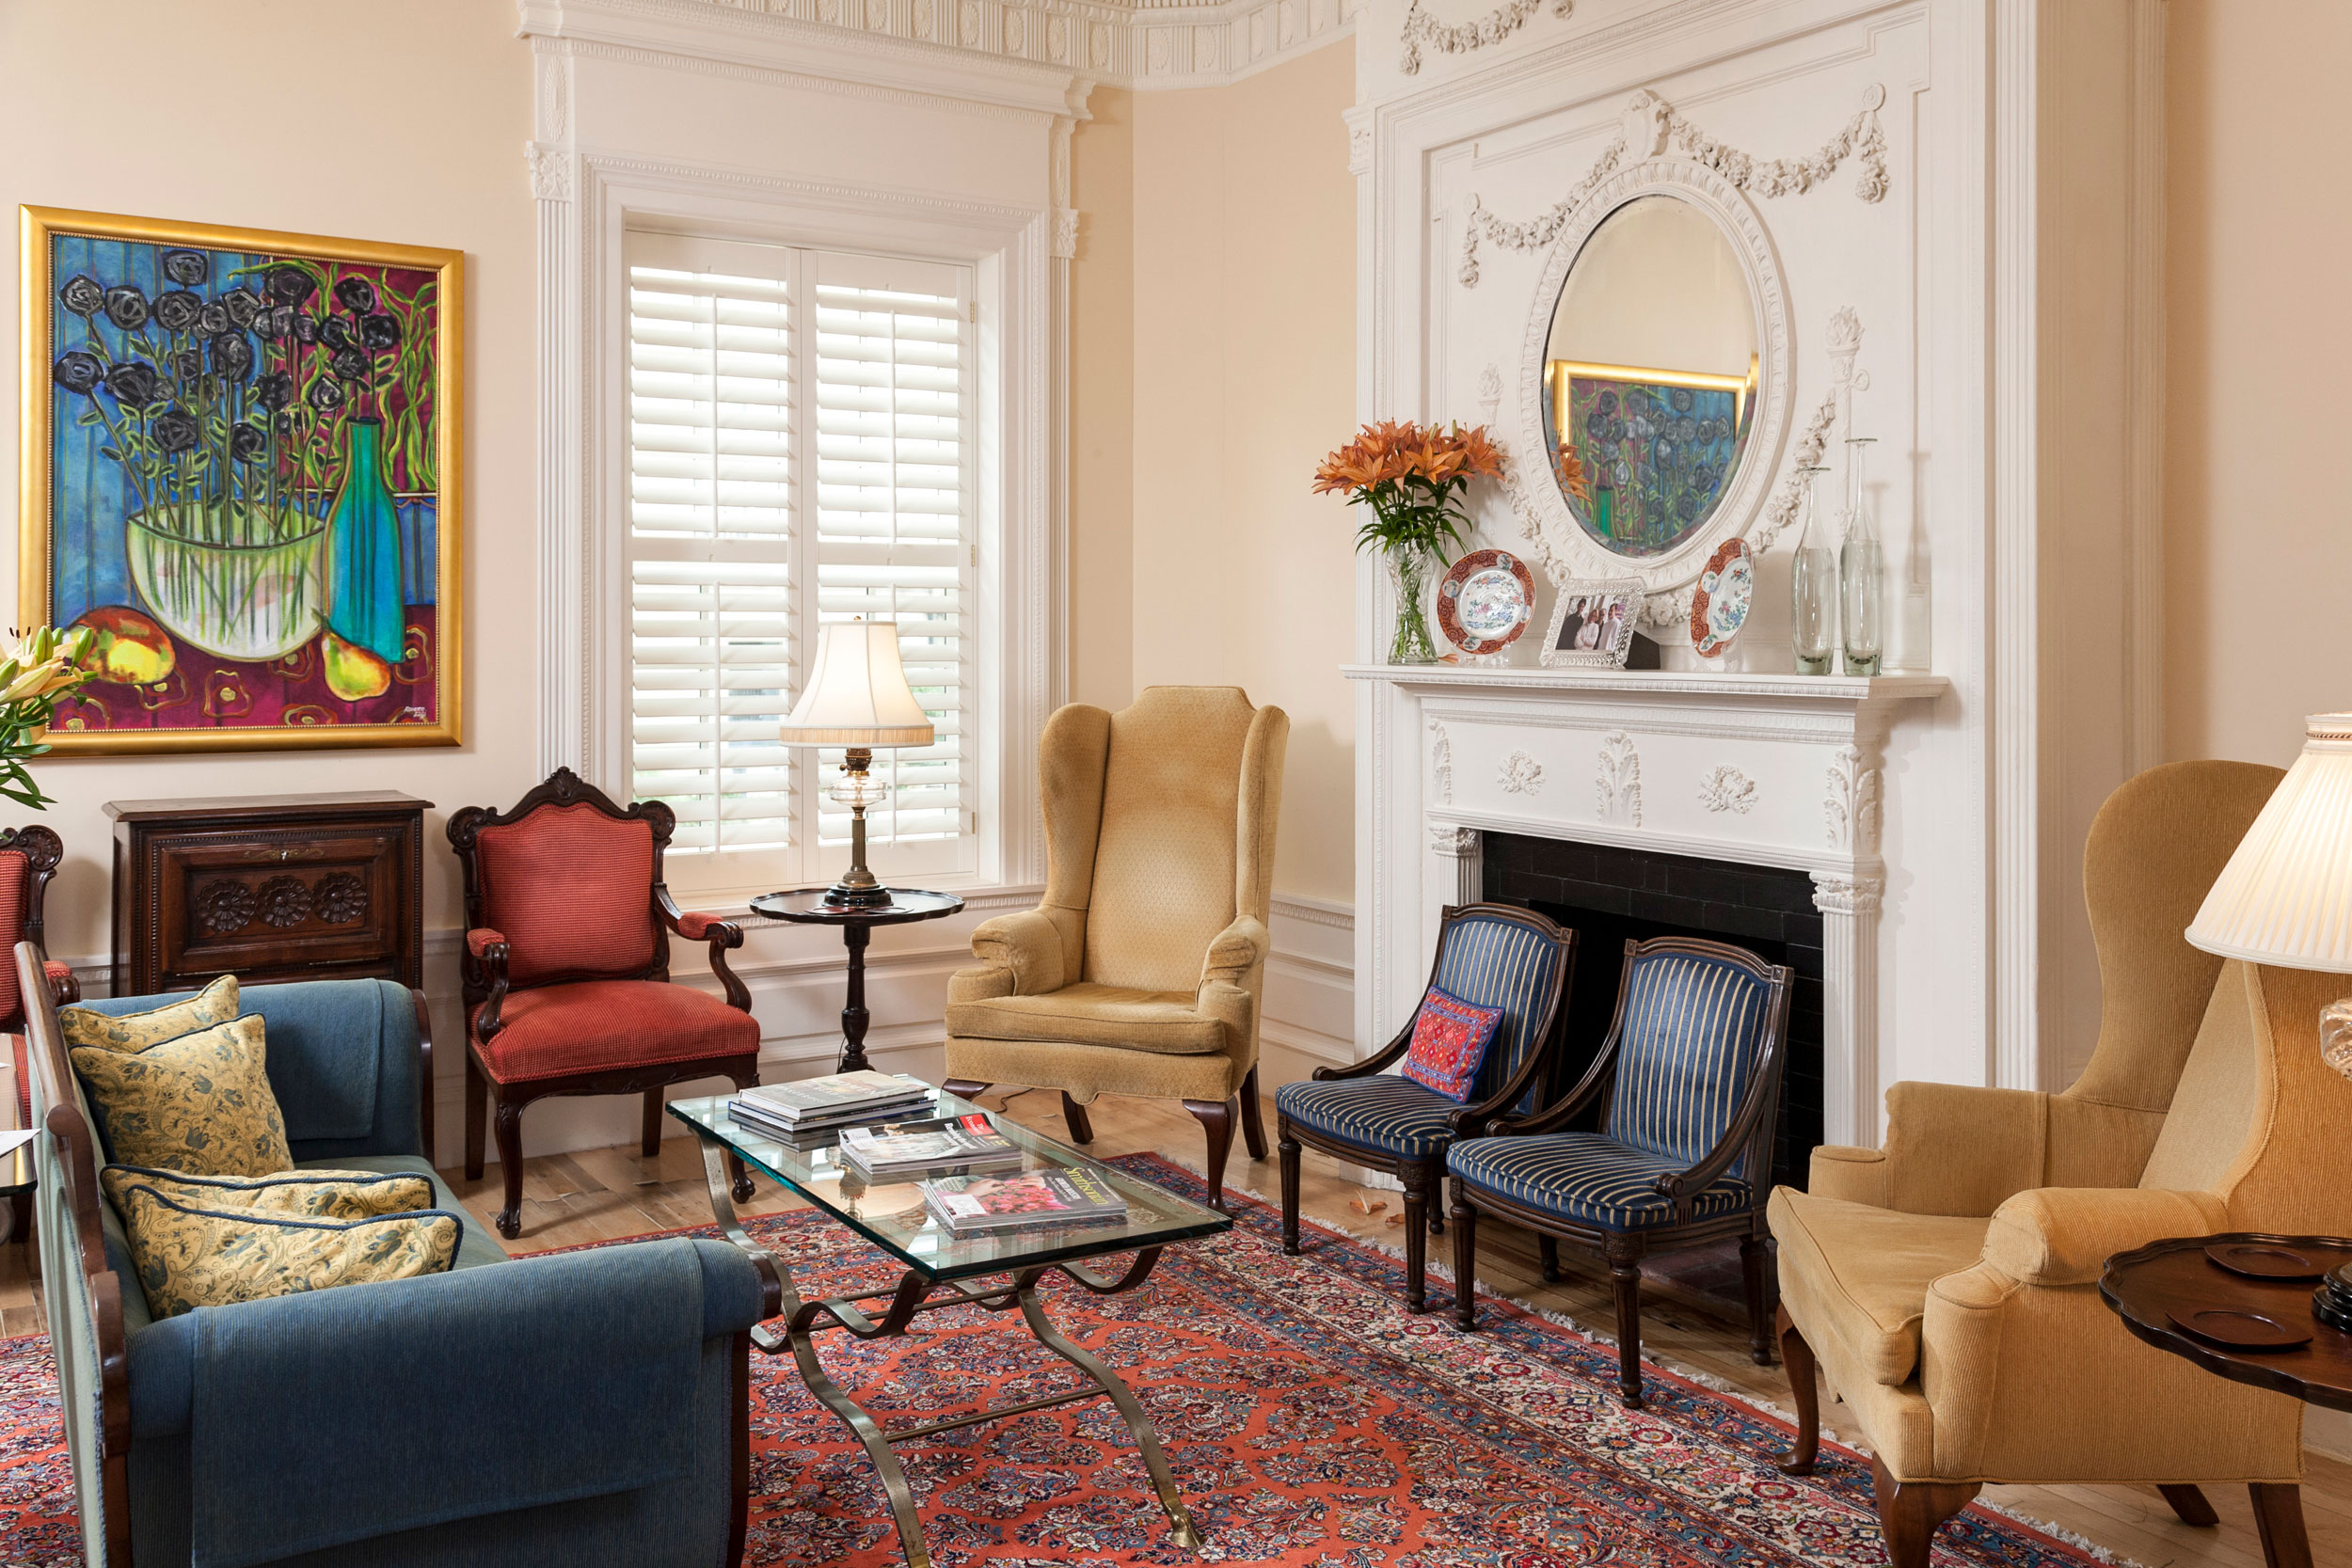  Former Embassies converted into Living Spaces in Washington DC. Photographed for The Washington Post Magazine. 